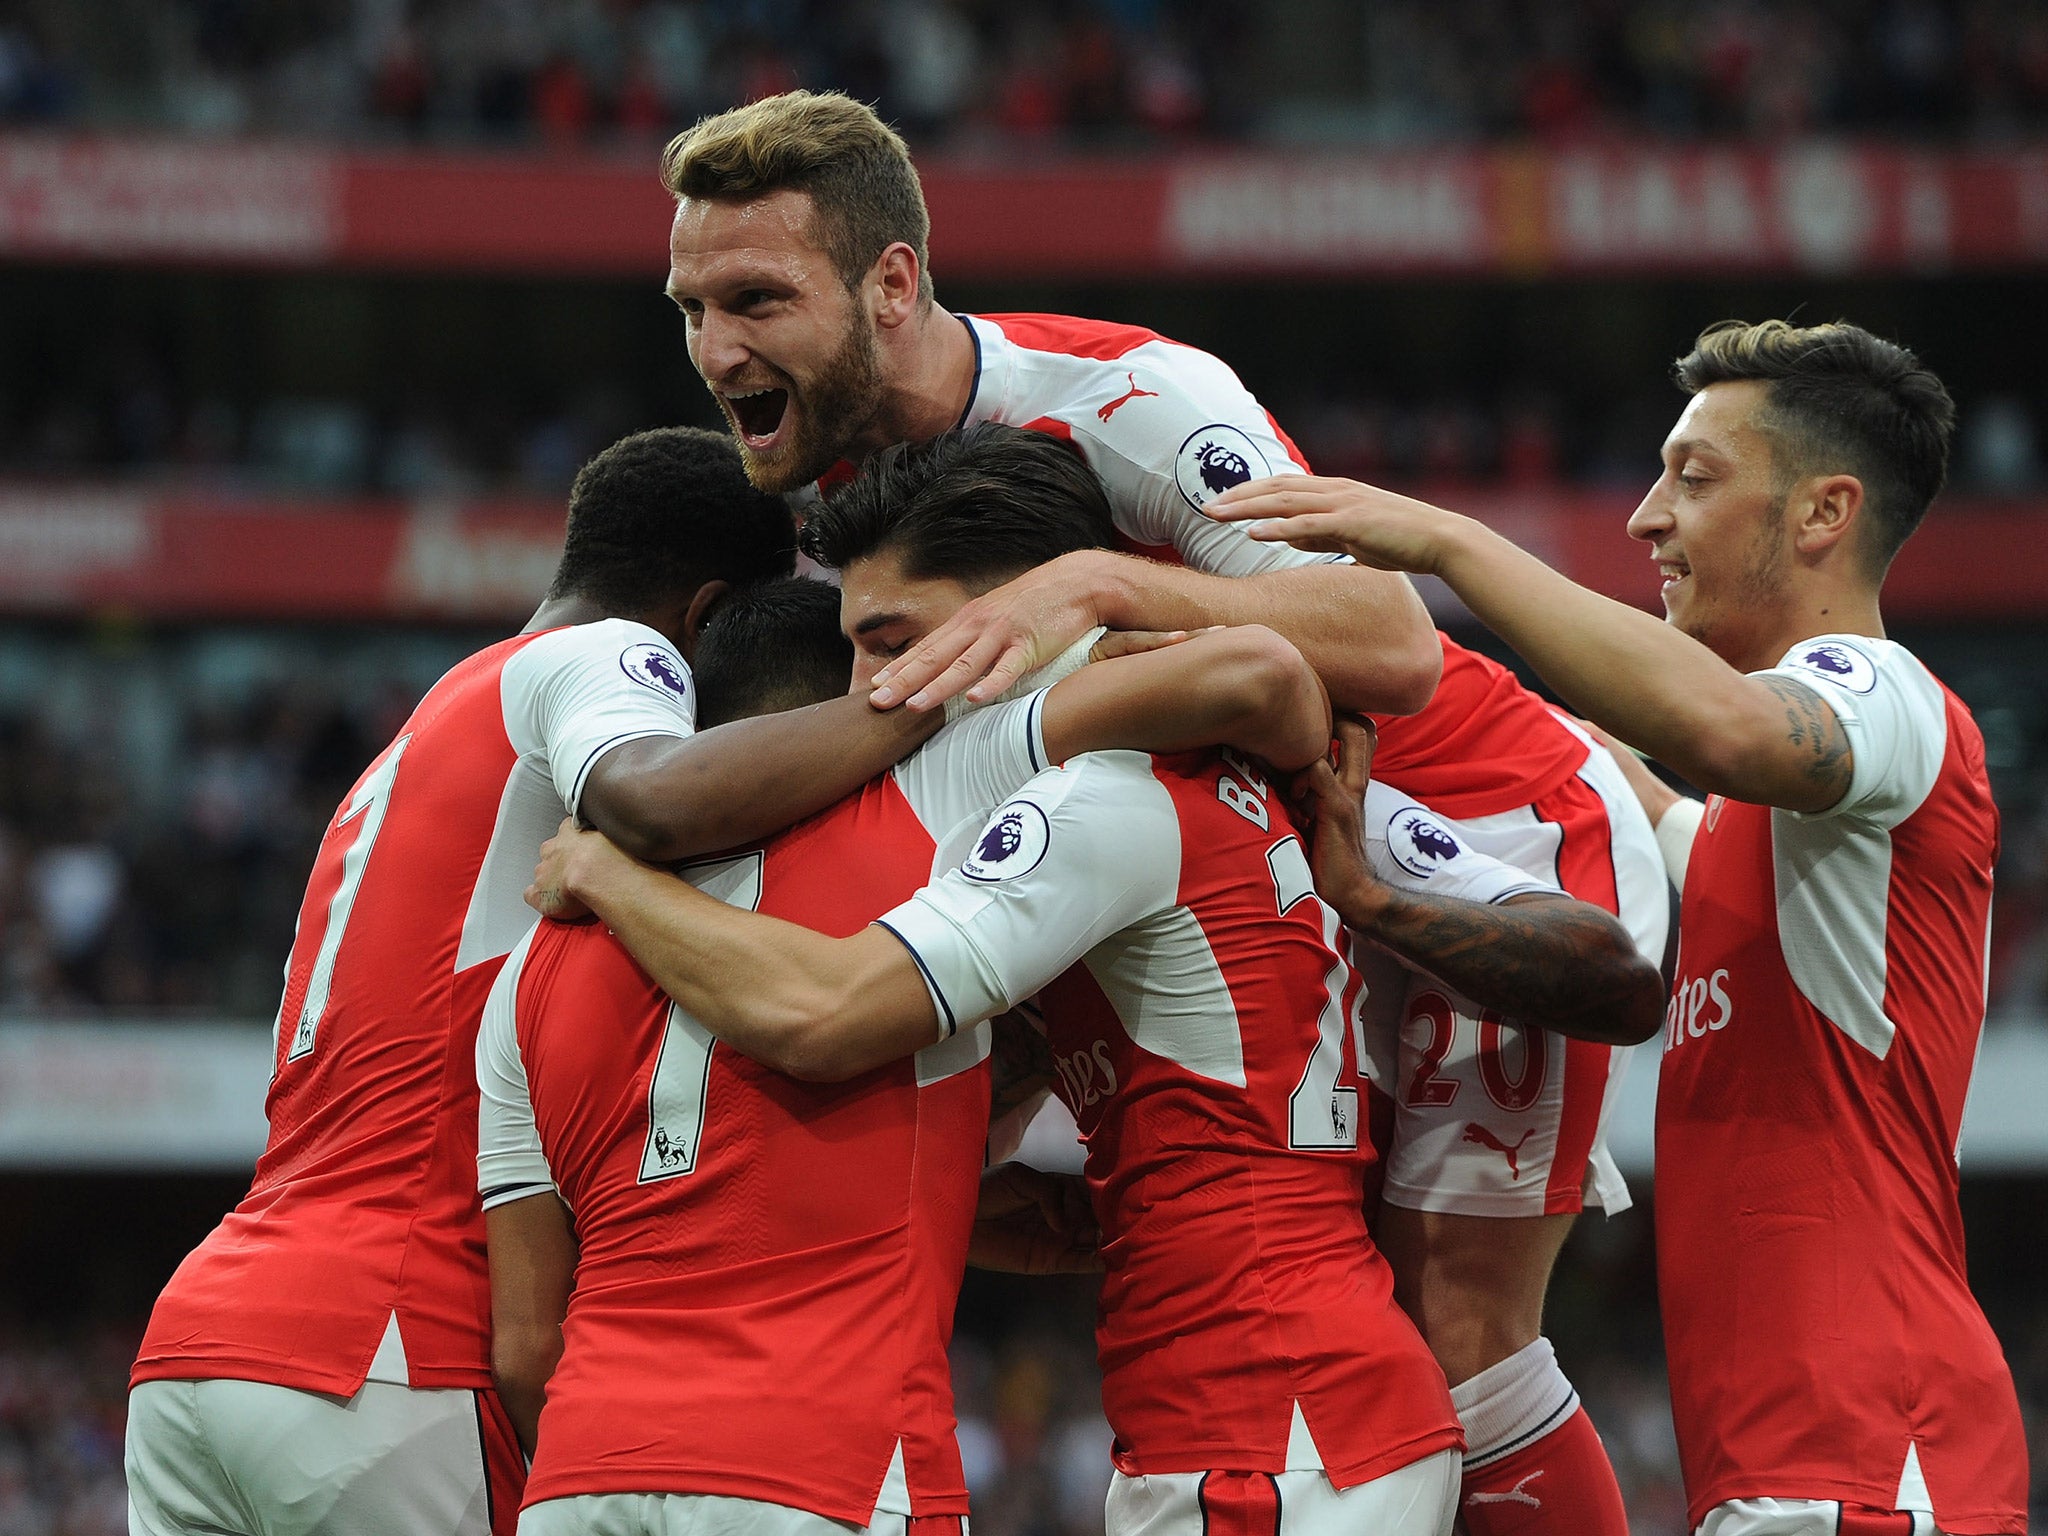 Shkodran Mustafi says he is fully aware of Arsenal's expectations of him following his £35m move